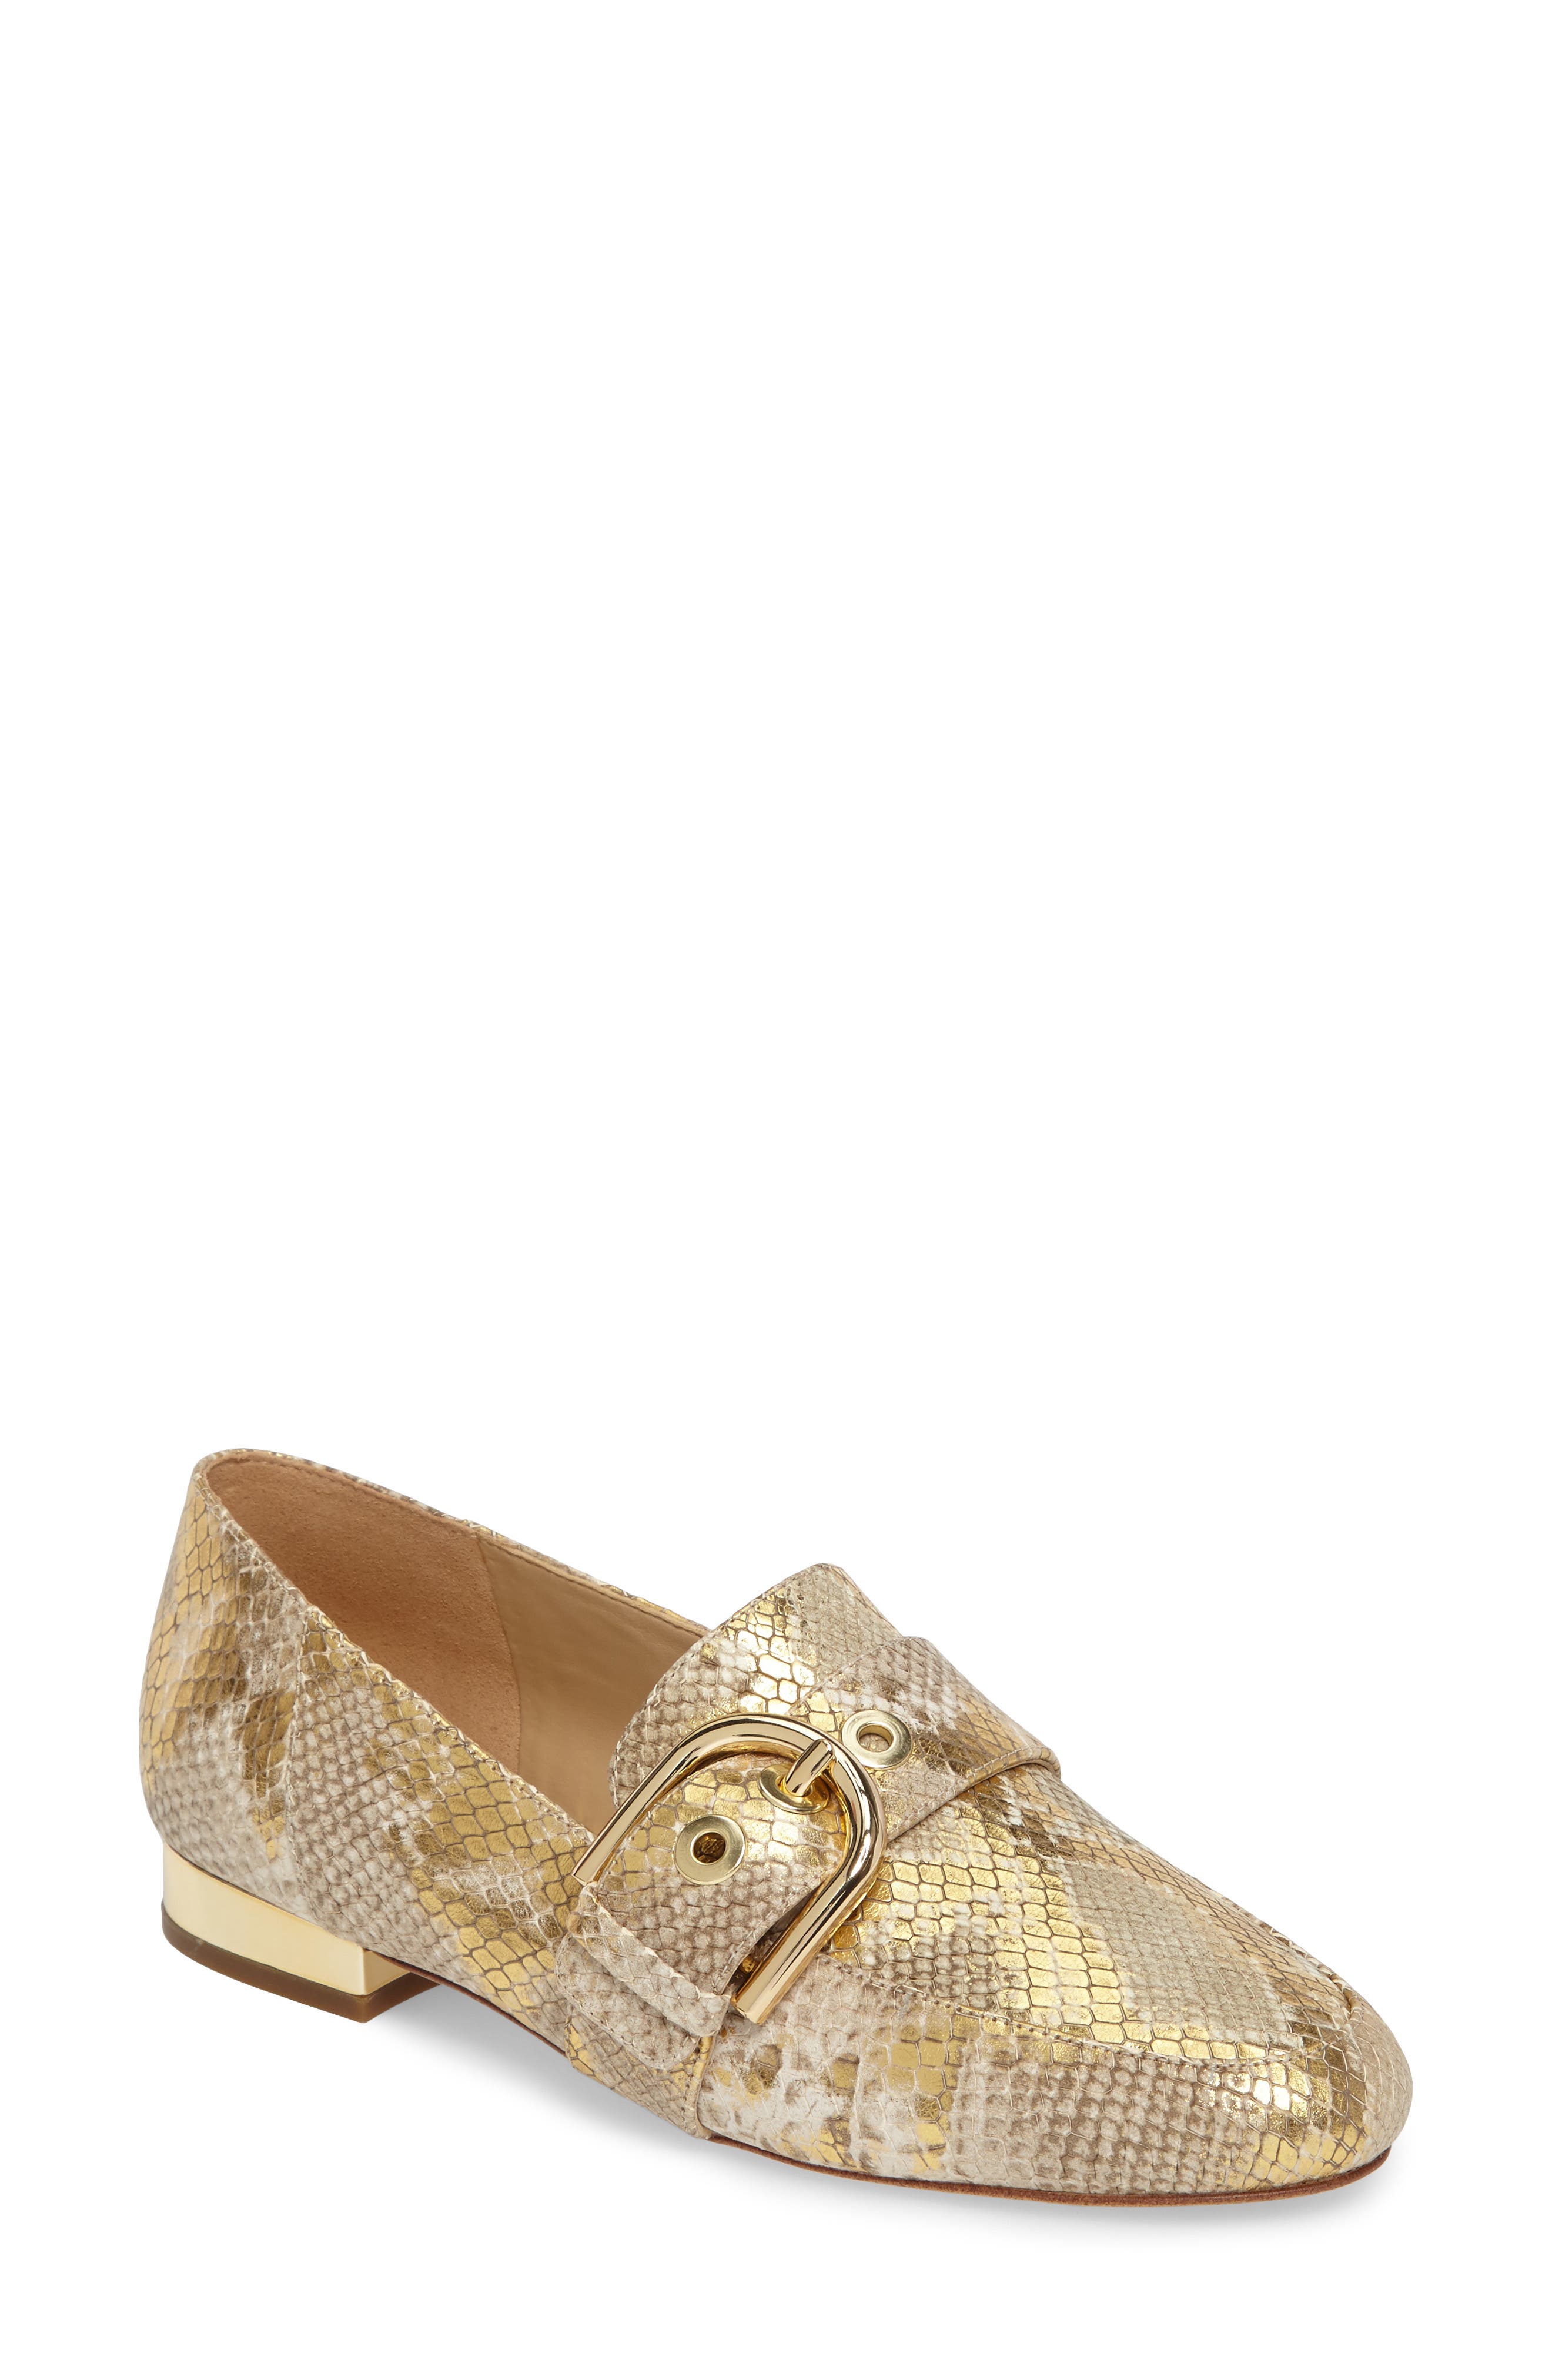 michael kors loafers womens for sale 